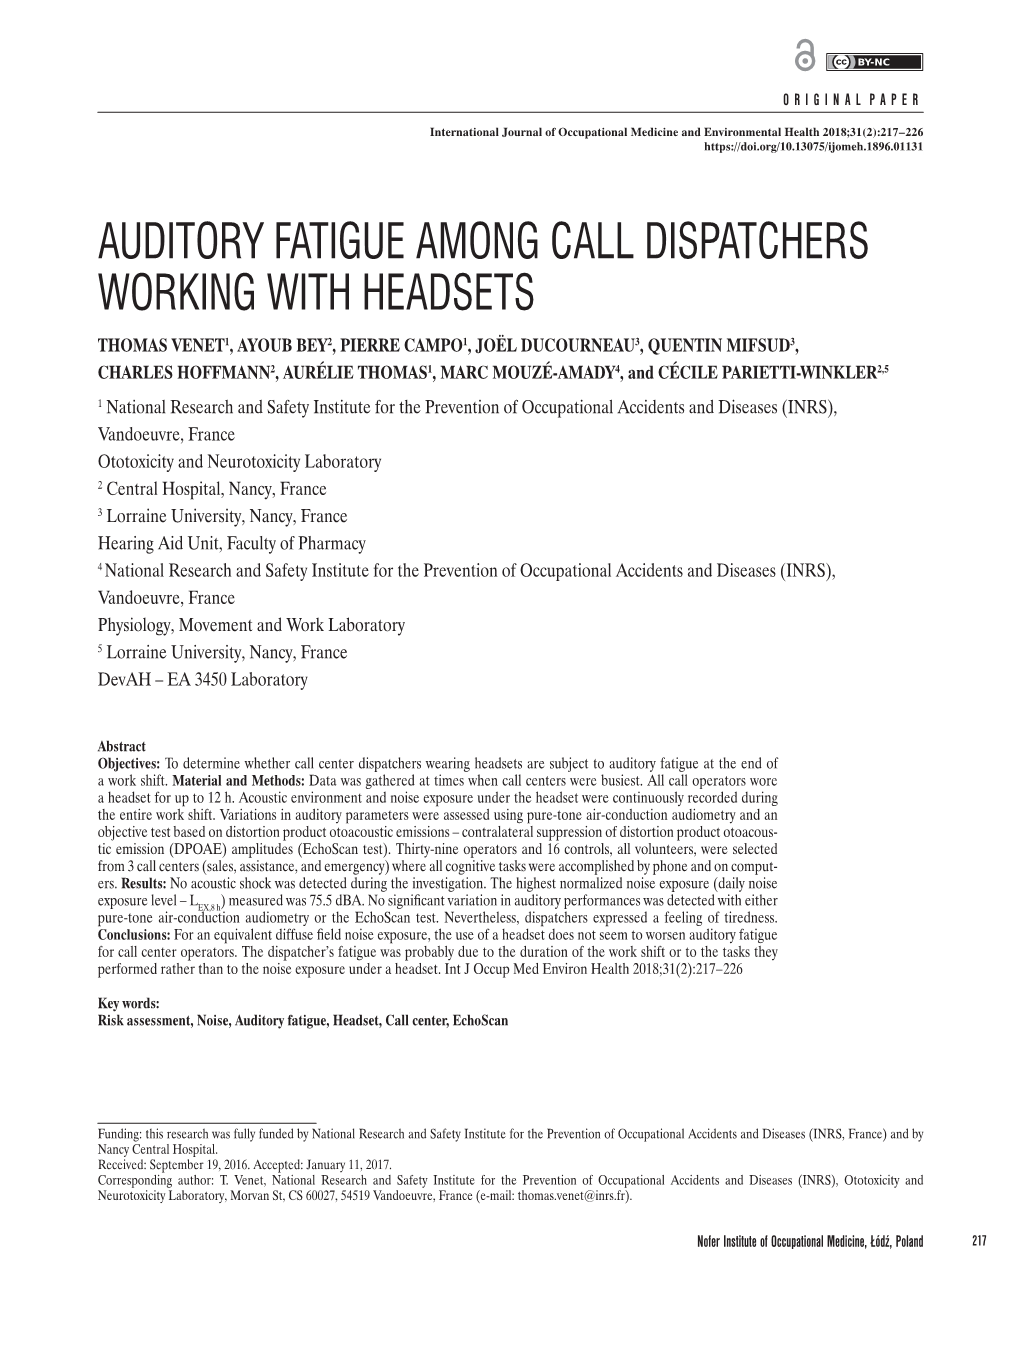 Auditory Fatigue Among Call Dispatchers Working with Headsets